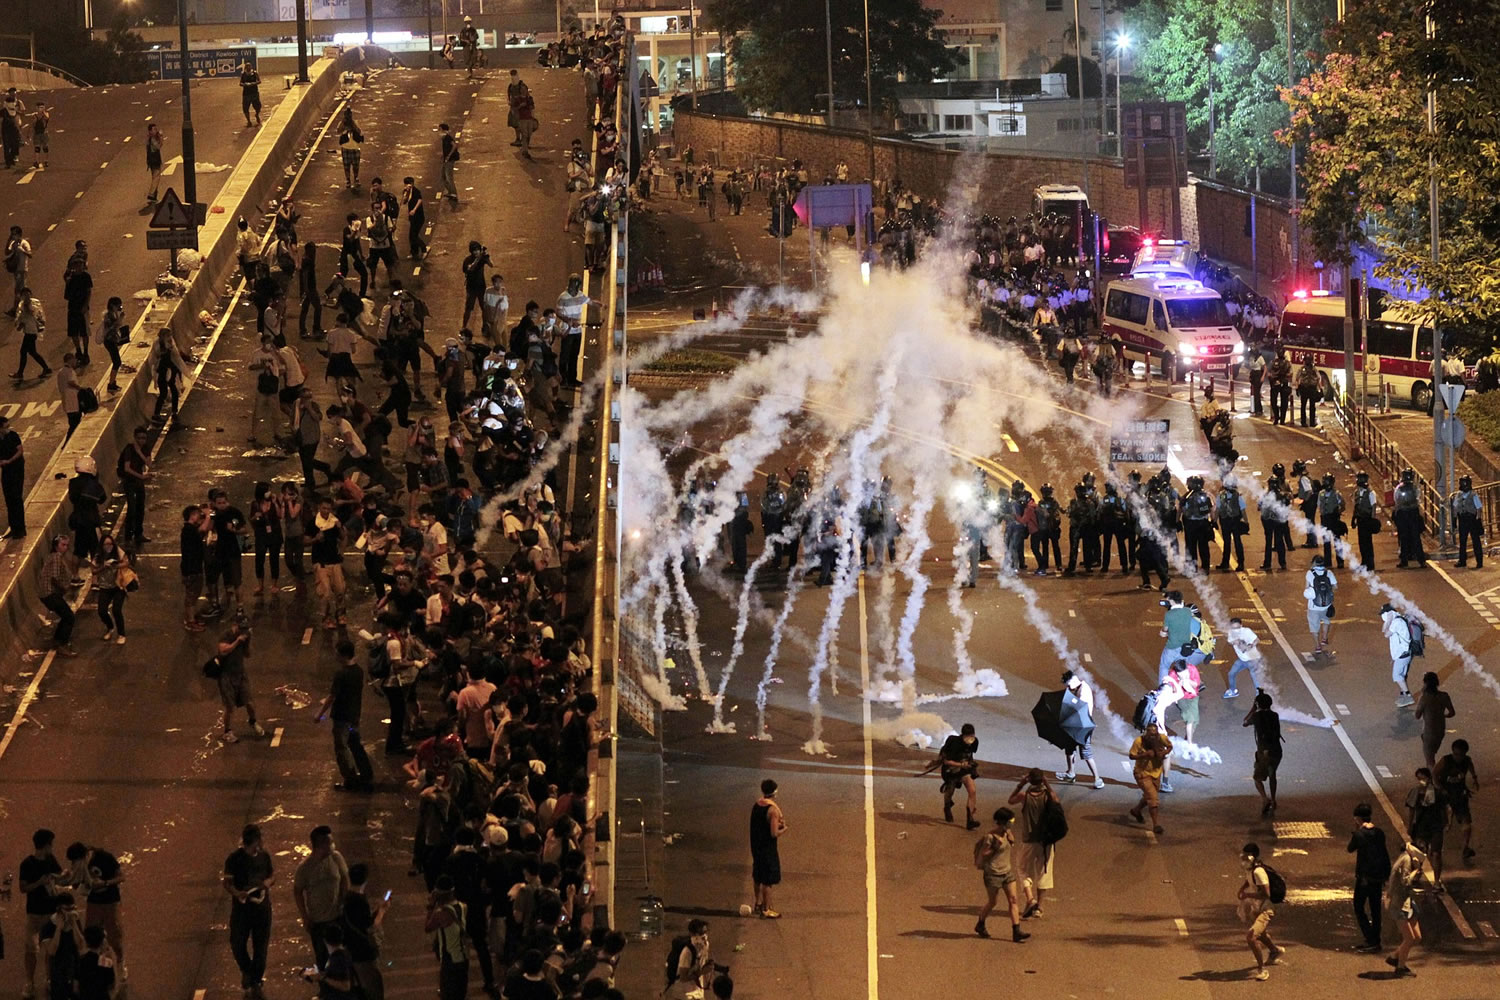 Riot police fire tear gas on student protesters occupying streets surrounding the government headquarters in Hong Kong, early Monday, Sept. 29, 2014. Pro-democracy demonstrators defied onslaughts of tear gas and appeals from Hong Kong's top leader to go home, as the protests over Beijing's decision to limit political reforms expanded across the city early Monday.